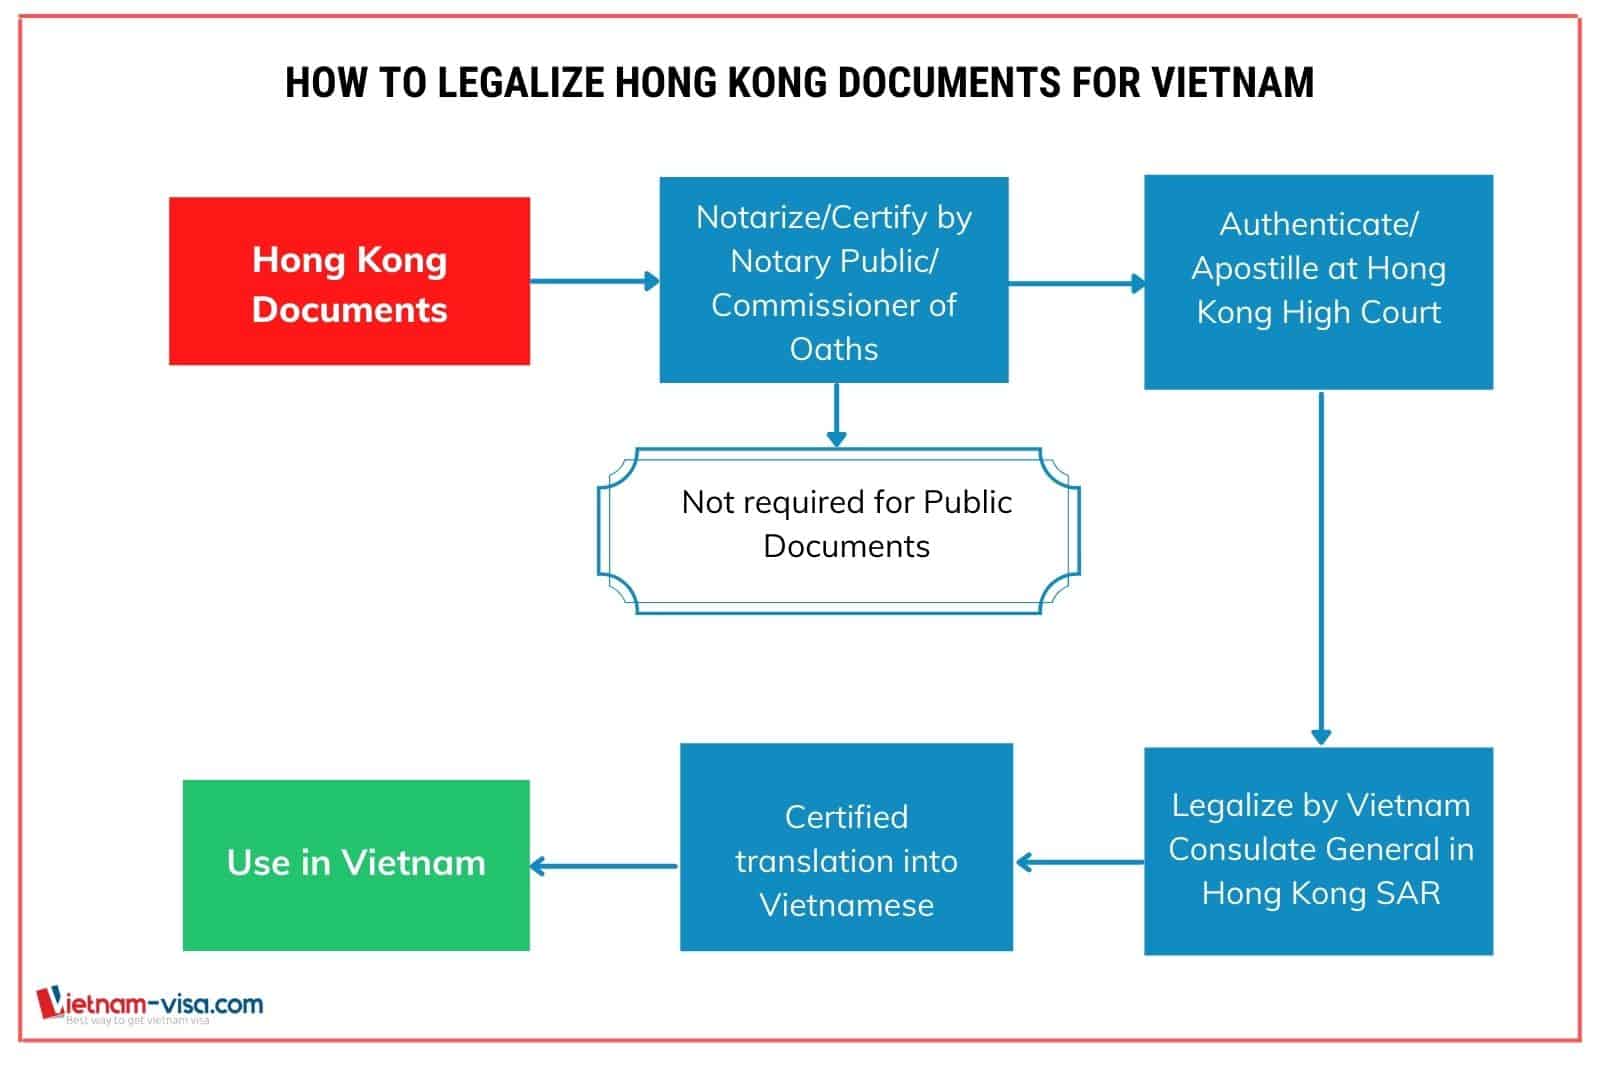 How to legalize Hong Kong documents for use in Vietnam - Vietnam-visa.com